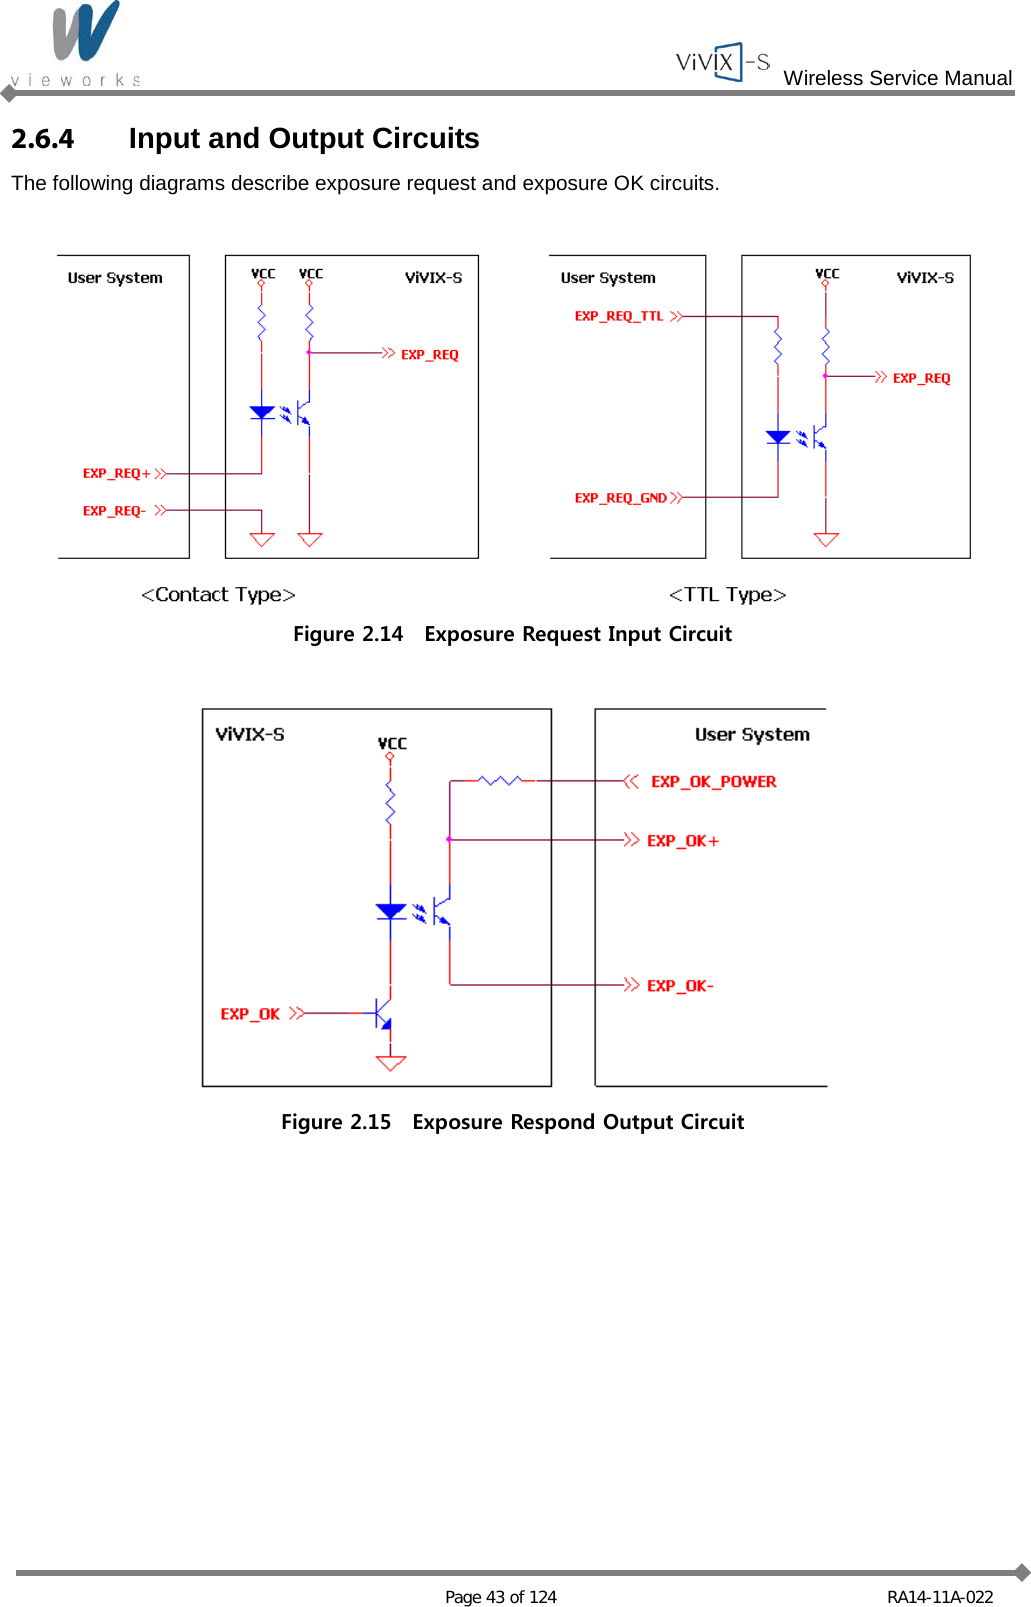  Wireless Service Manual   Page 43 of 124 RA14-11A-022 2.6.4 Input and Output Circuits The following diagrams describe exposure request and exposure OK circuits.   Figure 2.14  Exposure Request Input Circuit   Figure 2.15  Exposure Respond Output Circuit   